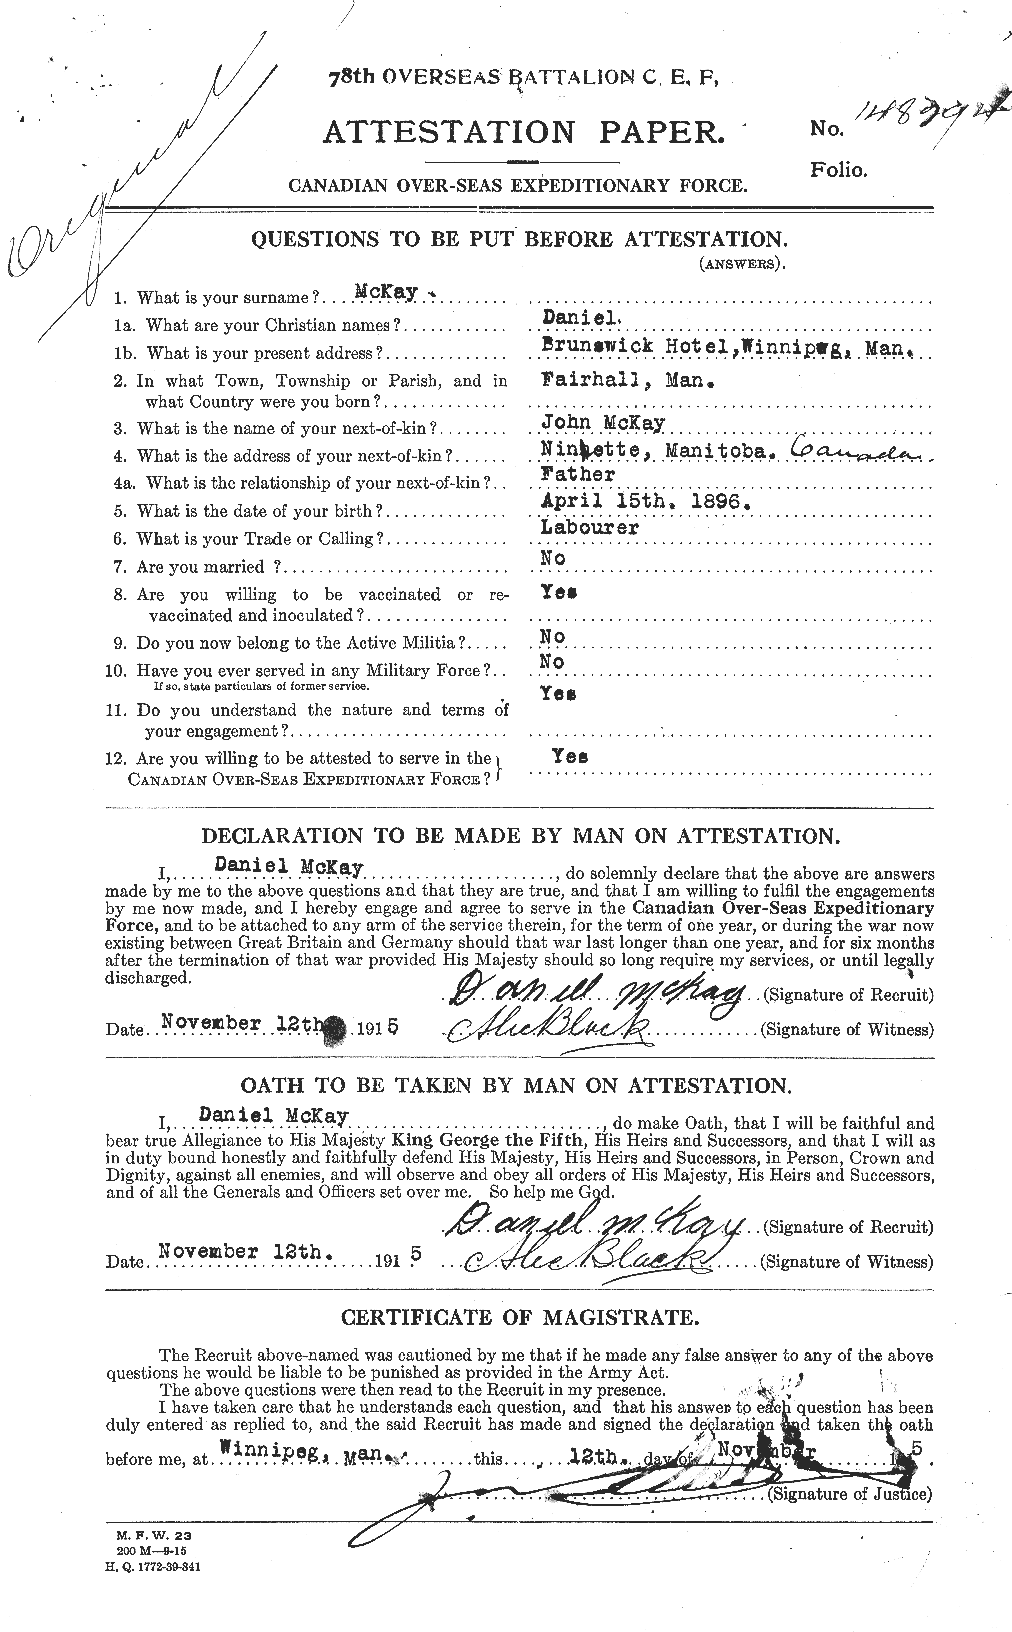 Personnel Records of the First World War - CEF 531110a